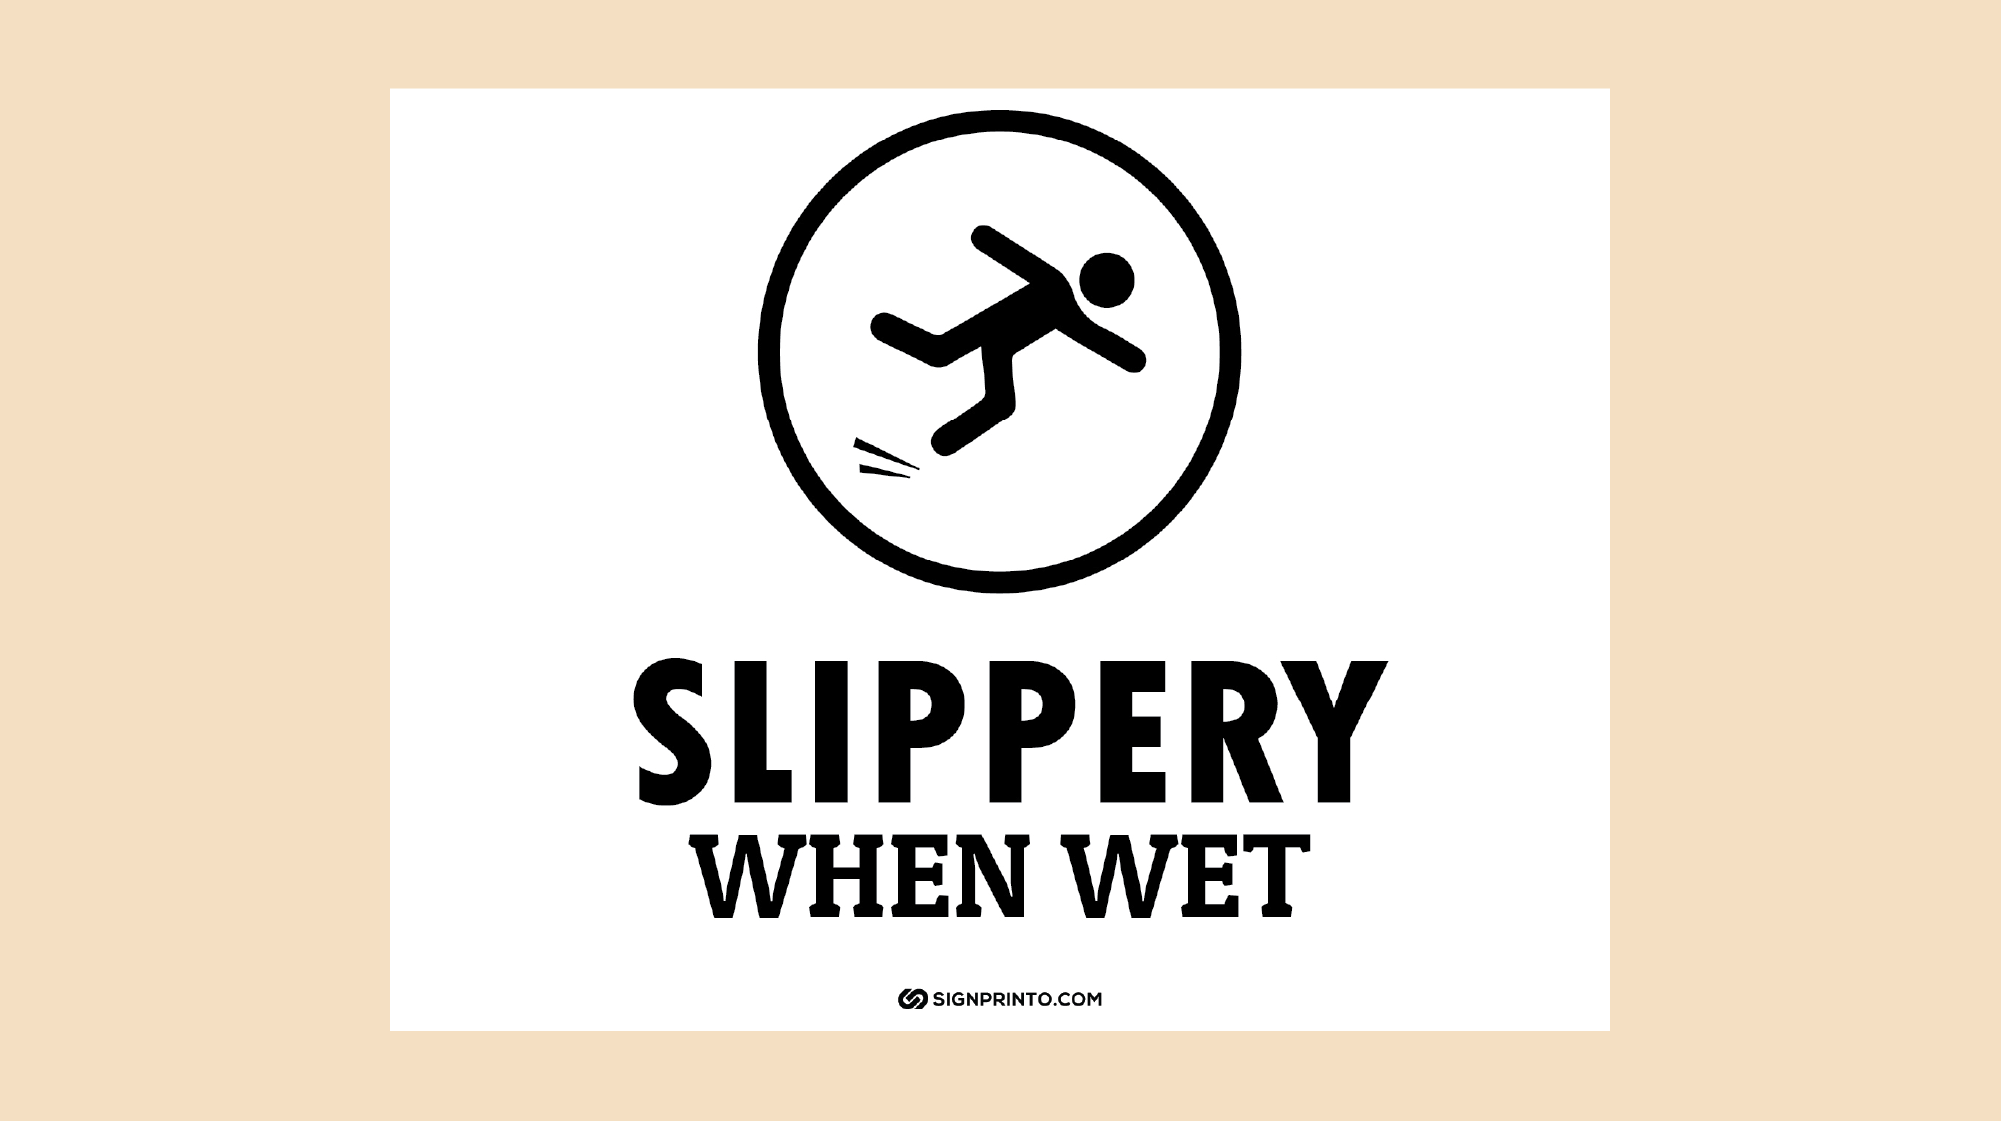 FREE PDF Alert: Slippery When Wet Sign - Download and Print